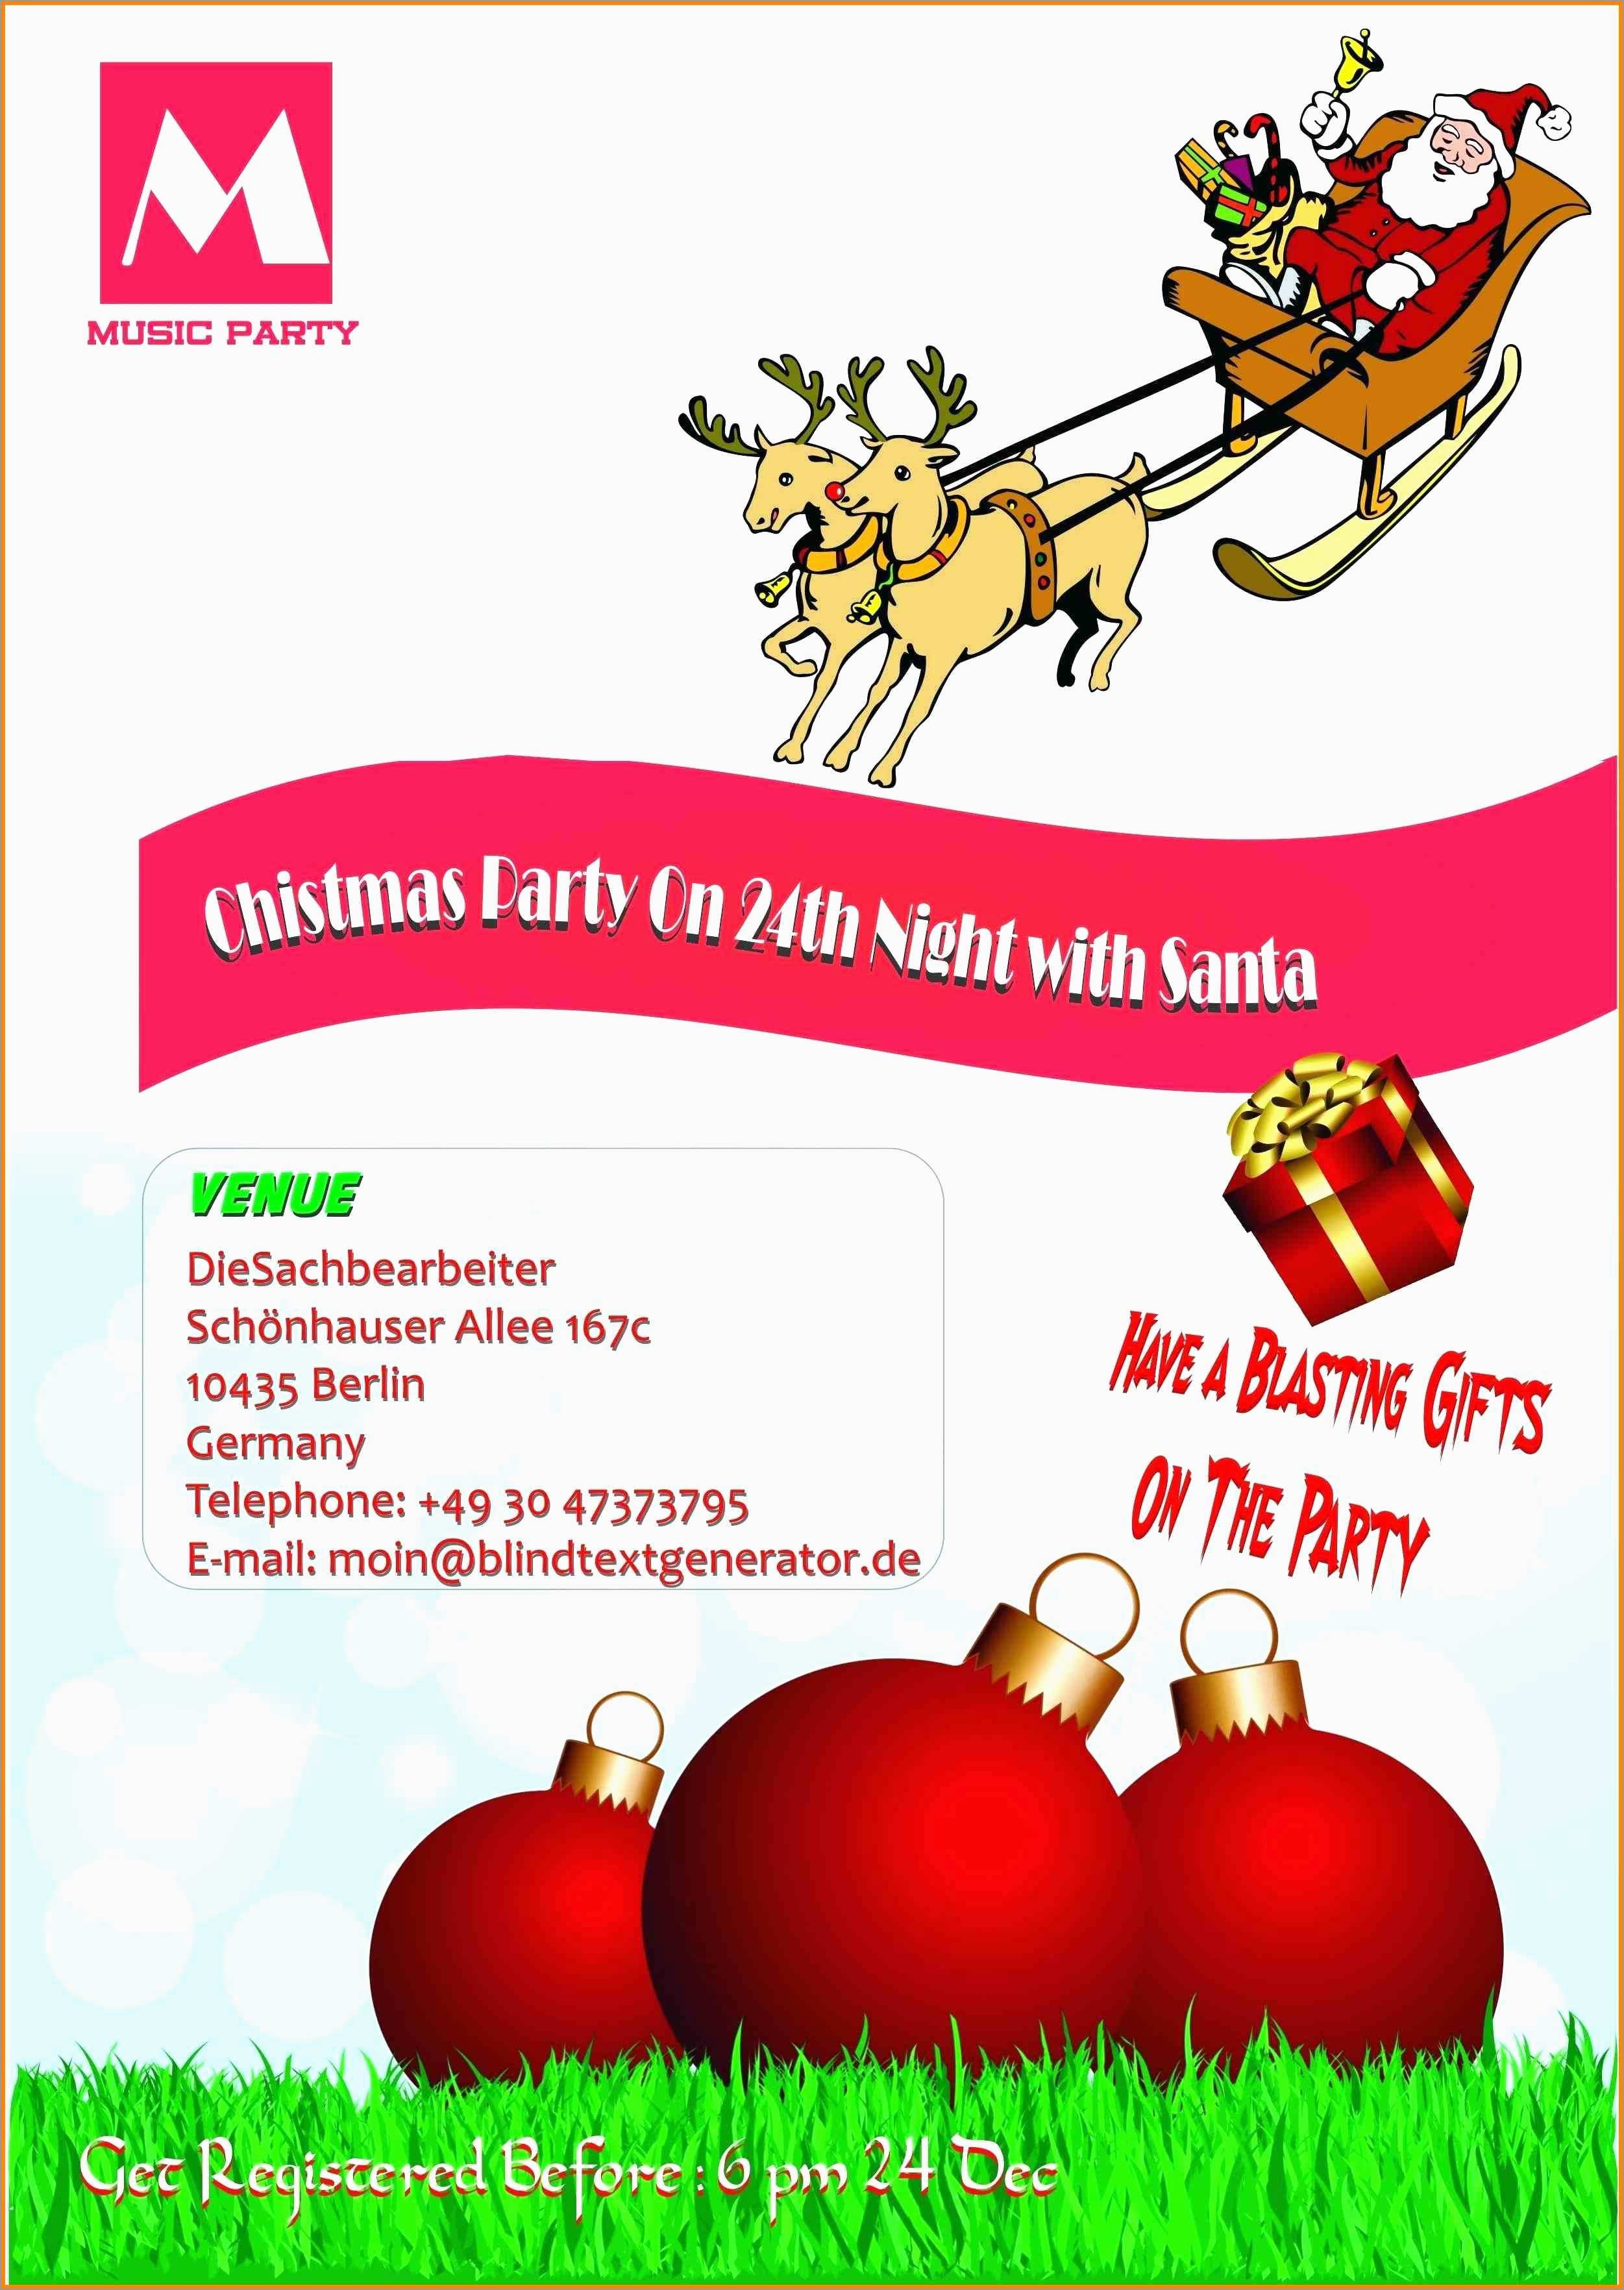 Unique Free Printable Christmas Party Flyer Templates | Best Of Template - Free Printable Christmas Party Flyer Templates